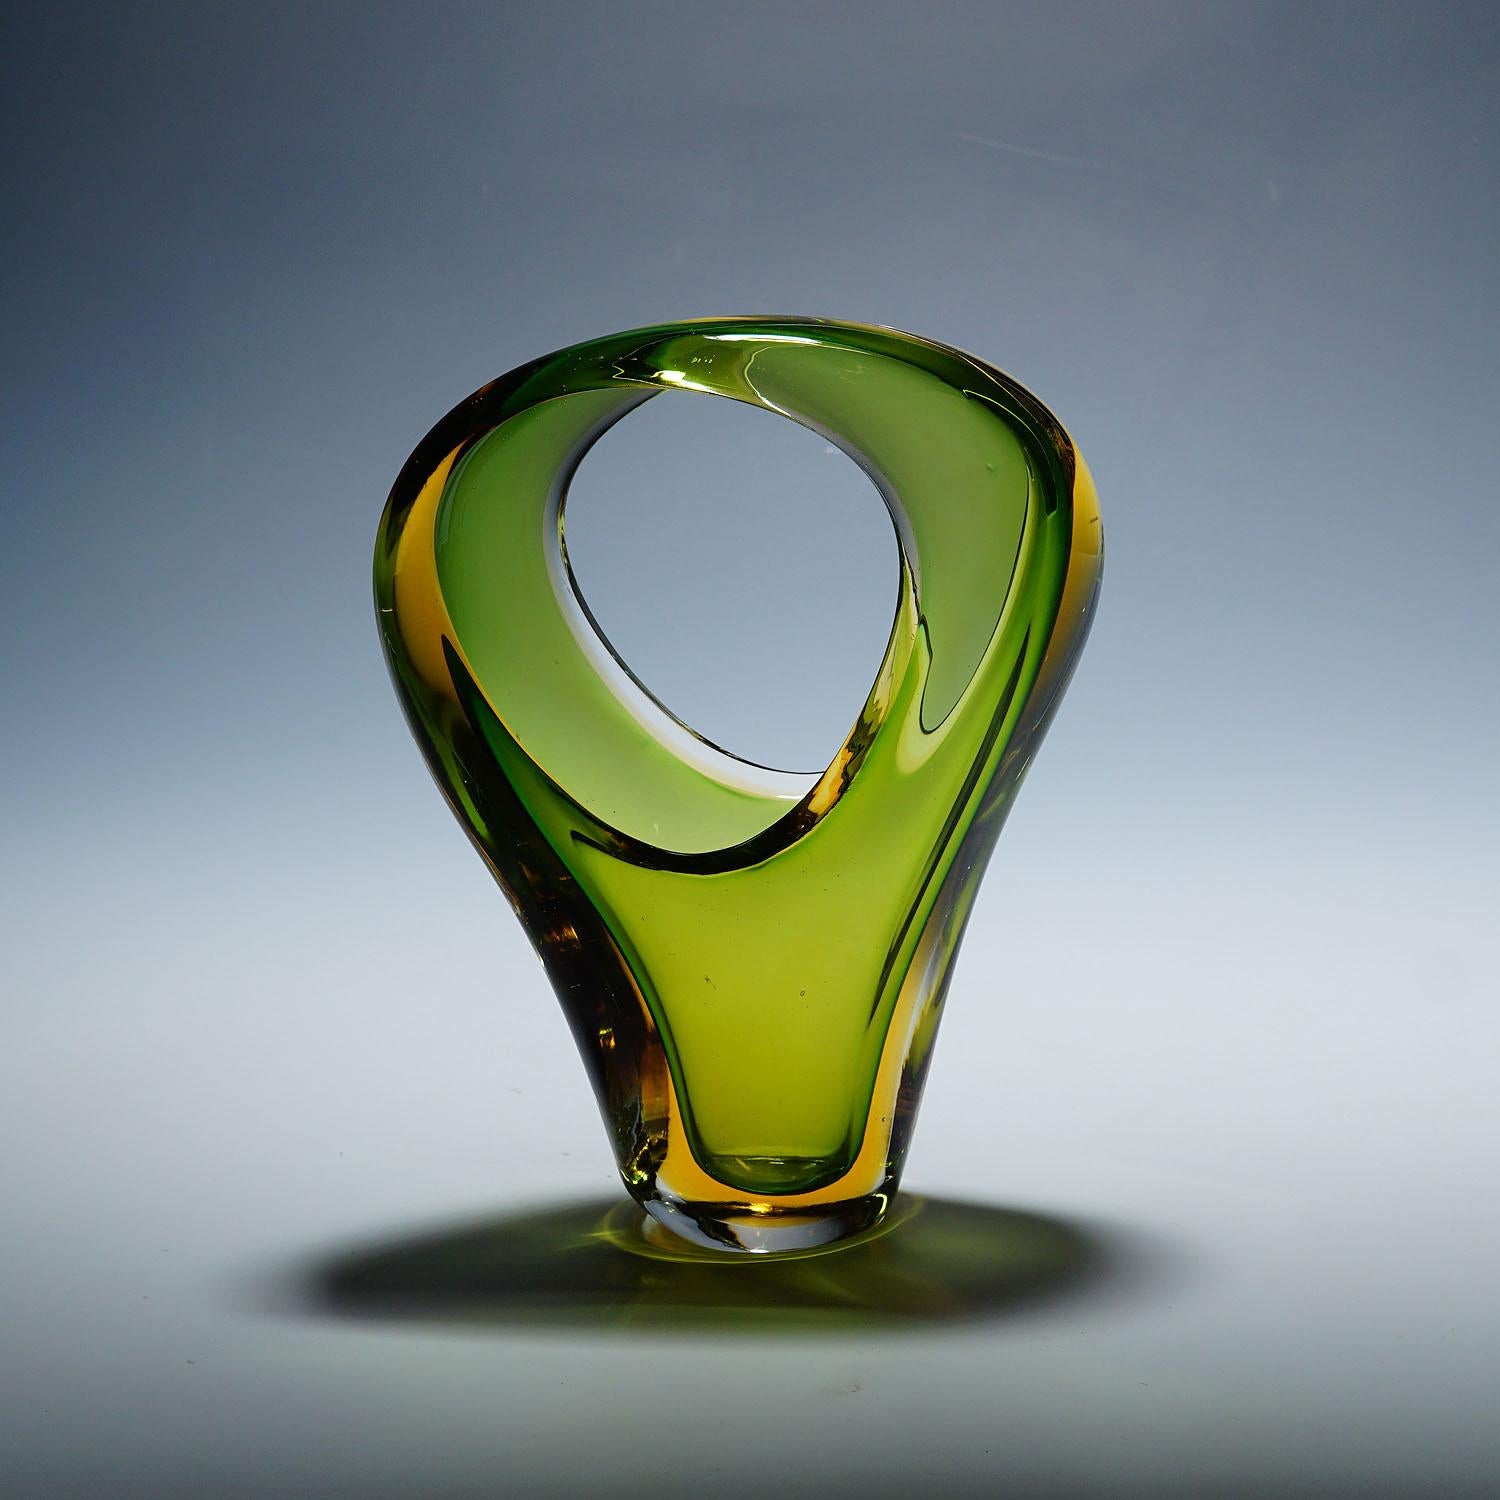 Archimede Seguso Sommerso Basket in Green and Amber, Murano Italy ca. 1950s

A vintage Venetian art glass basket in asymetrical shape designed by Archimede Seguso for Vetreria Artistica Archimede Seguso ca. 1950s. Manufactured in thick green and